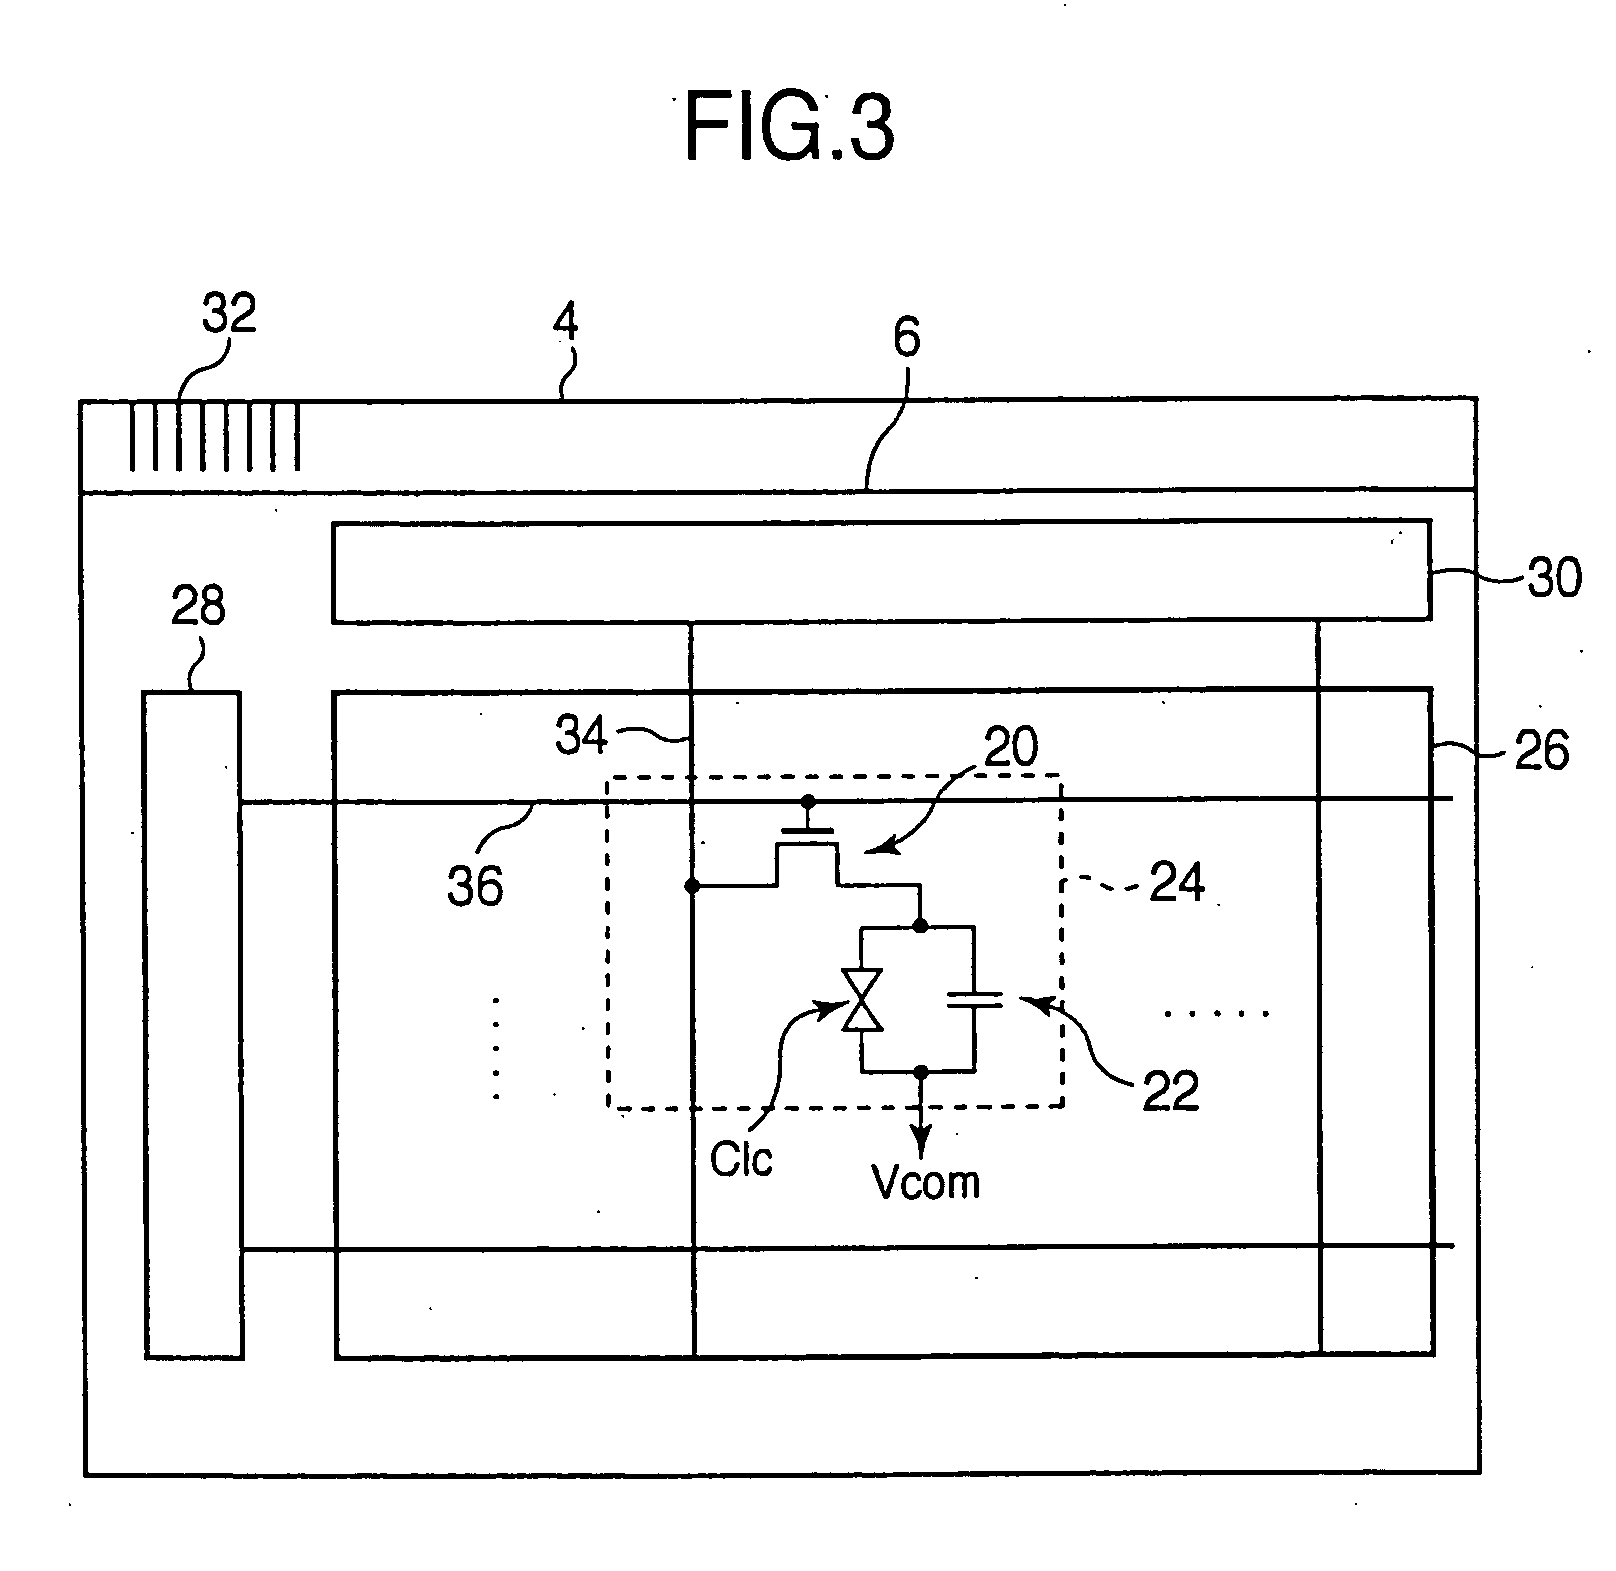 Substrate for liquid crystal display device, manufacturing method of the same, and liquid crystal display device having the same